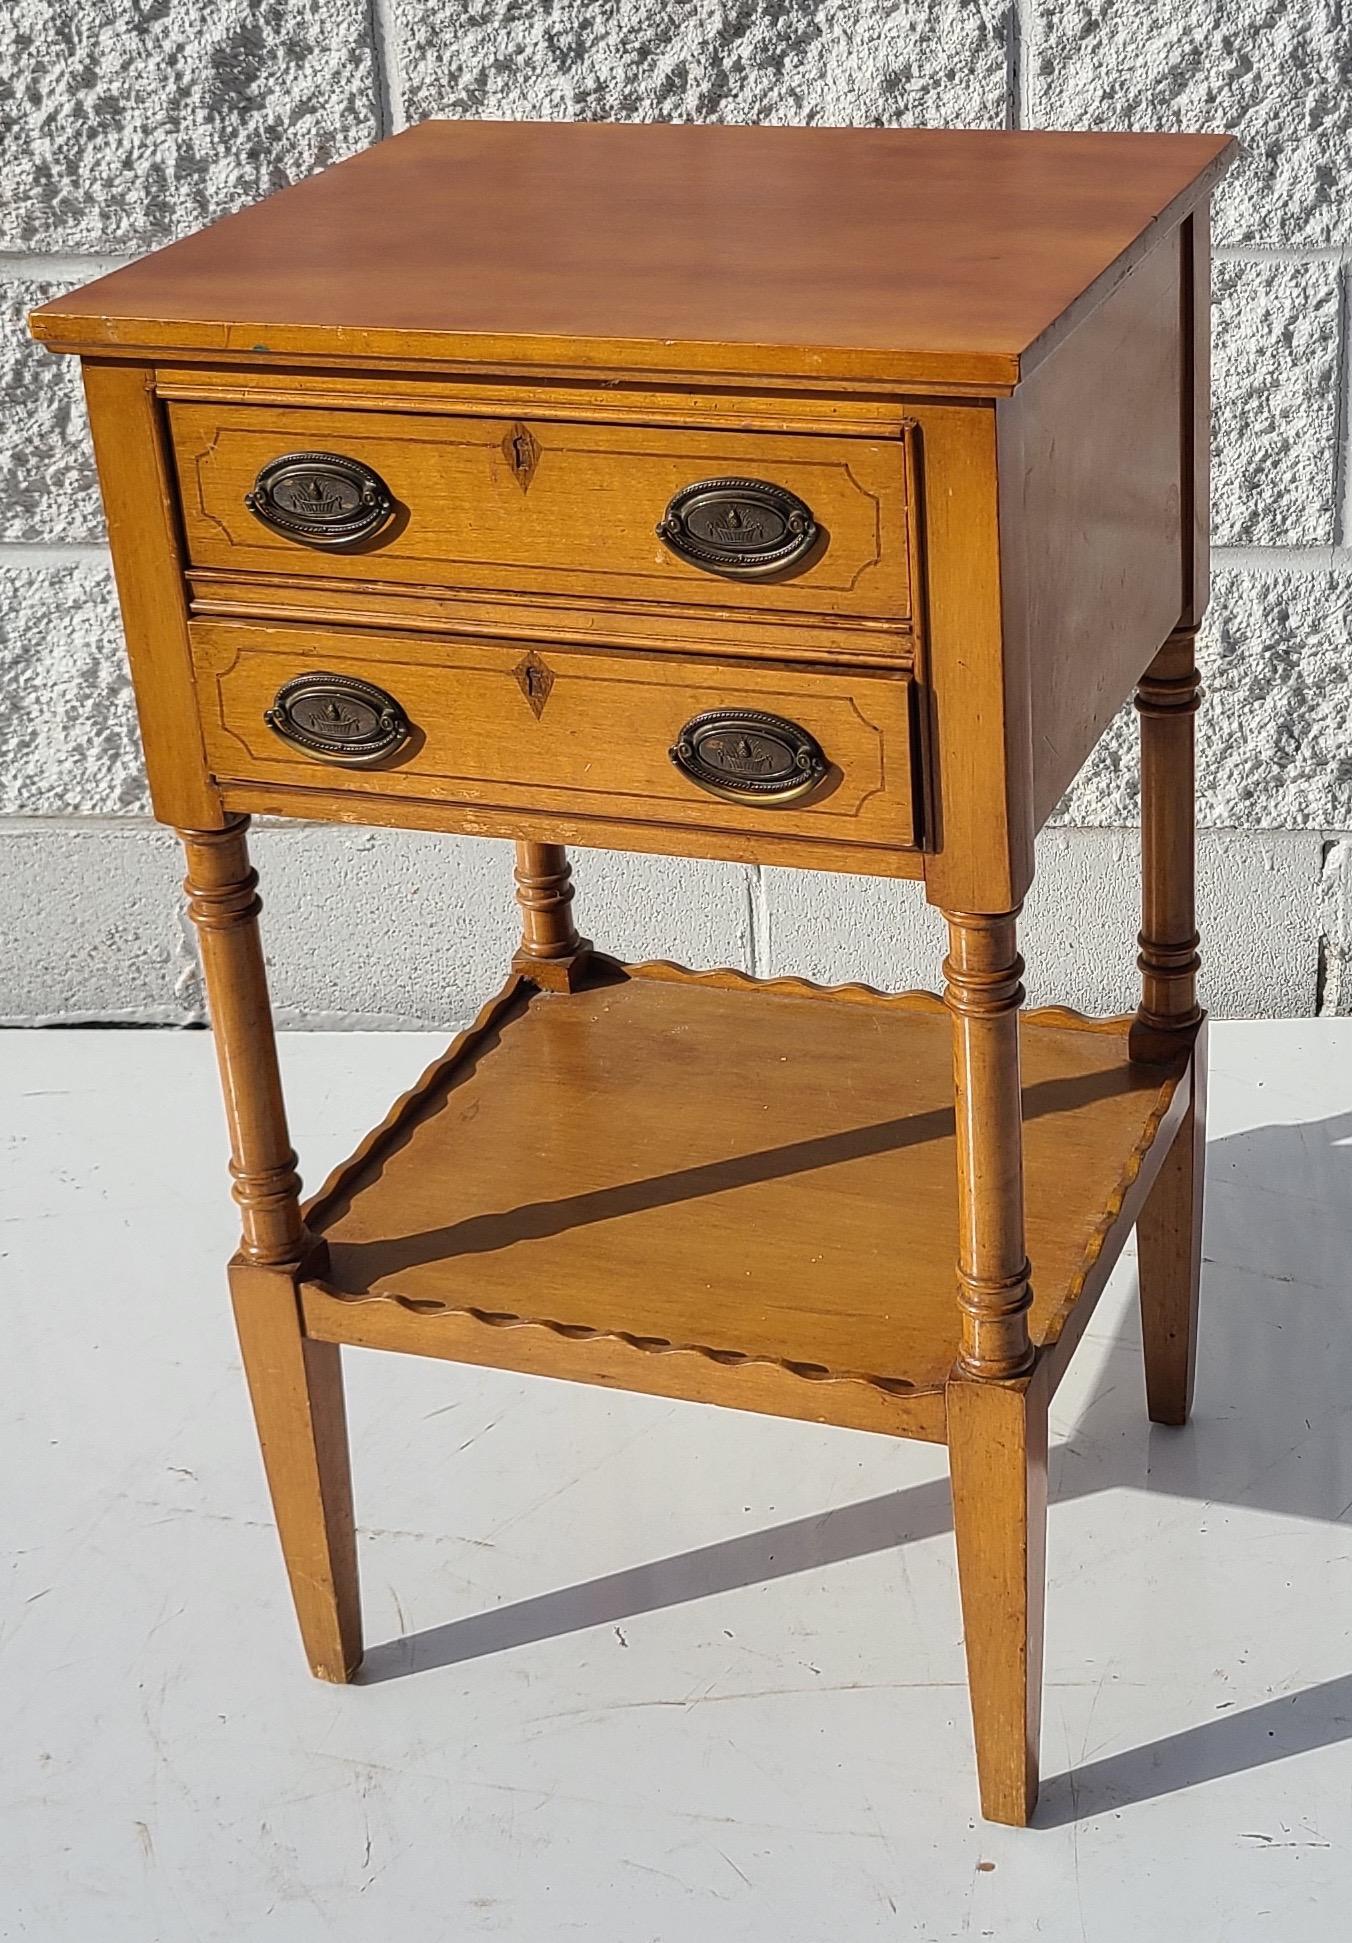 2 Drawer night stand of maple with brass pulls.
Traditional revival piece circa mid 1930s.

